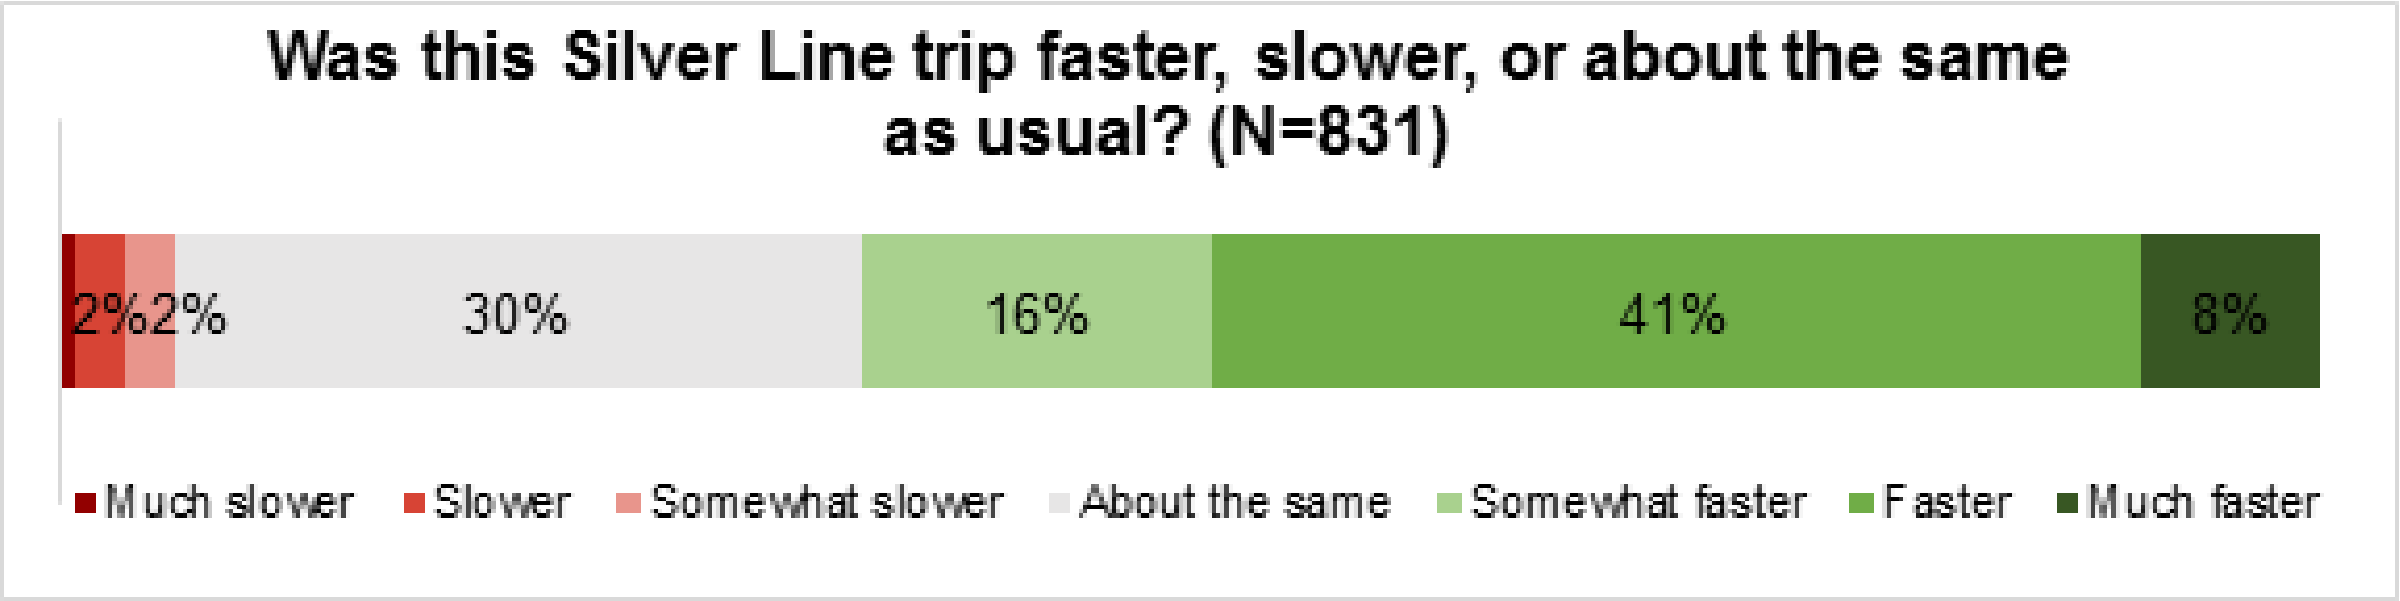 Chart showing survey responses answering whether their trip was faster, slower or a similar time as normal.